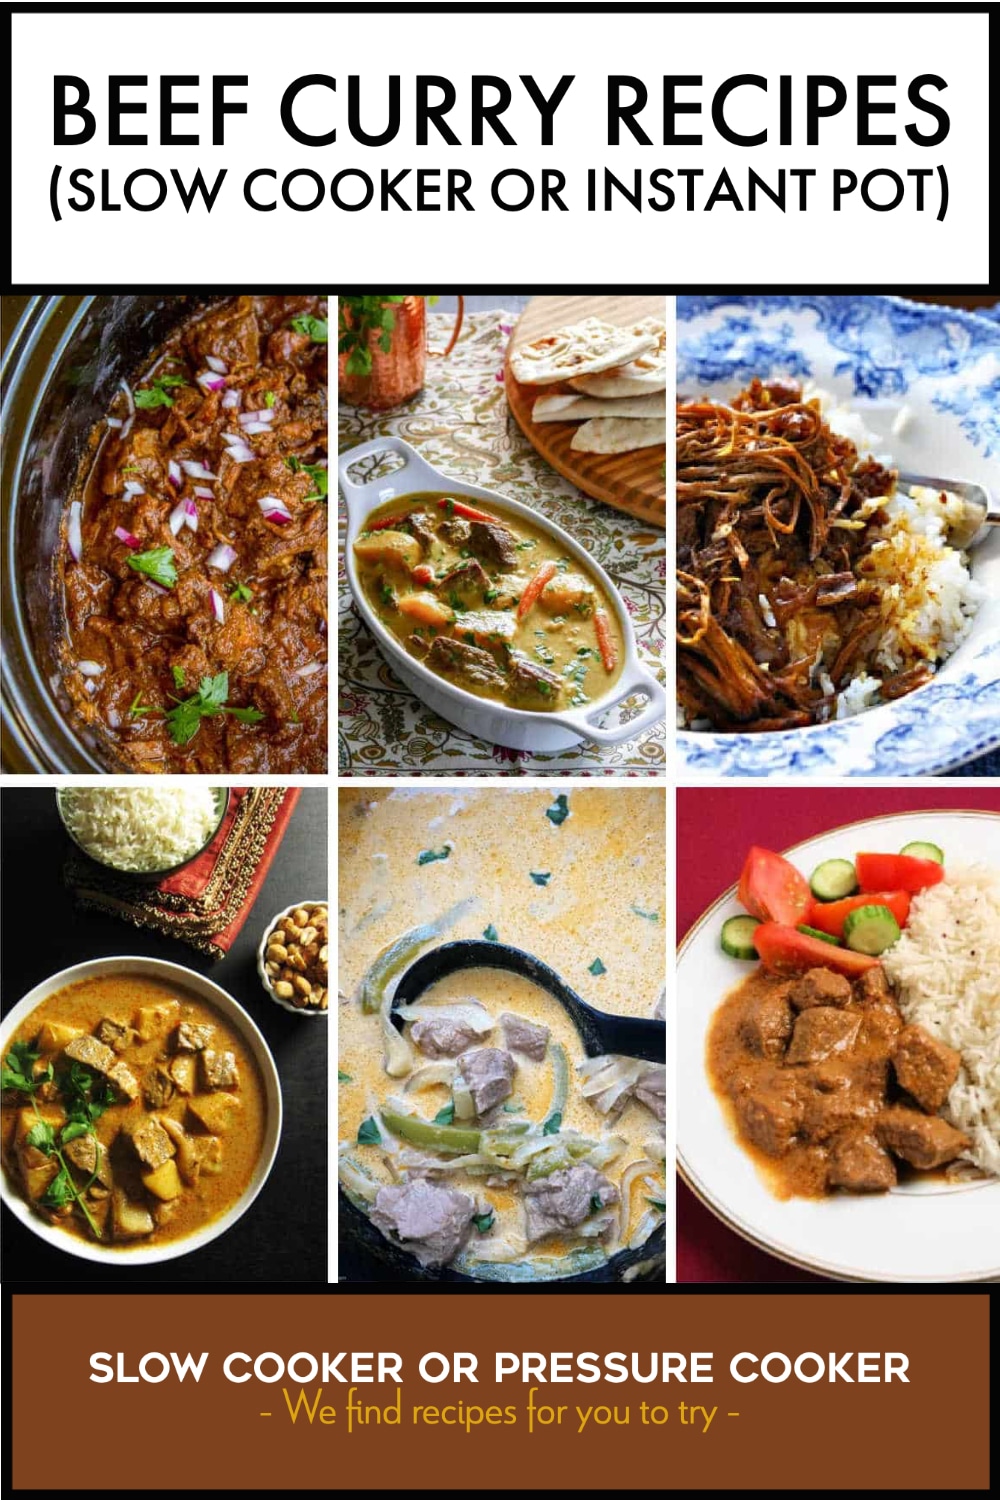 https://www.slowcookerfromscratch.com/wp-content/uploads/2023/02/BEEF-CURRY-RECIPES-SLOW-COOKER-OR-INSTANT-POT-1.jpg